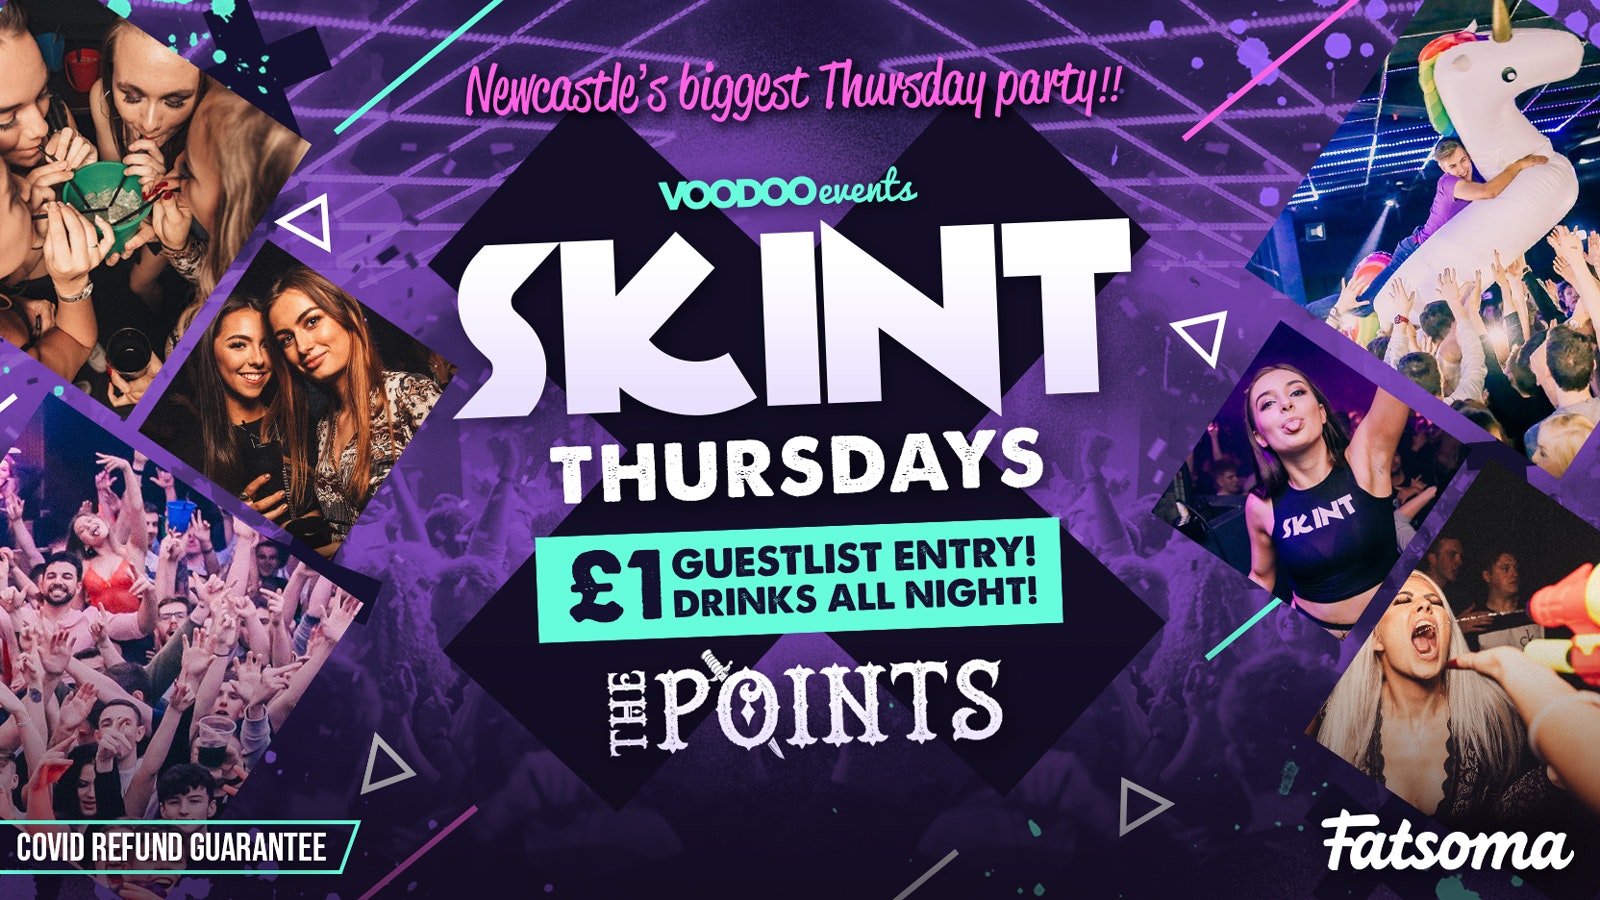 Skint – SOLD OUT!! Limited paying spaces available on the door after 11.30pm